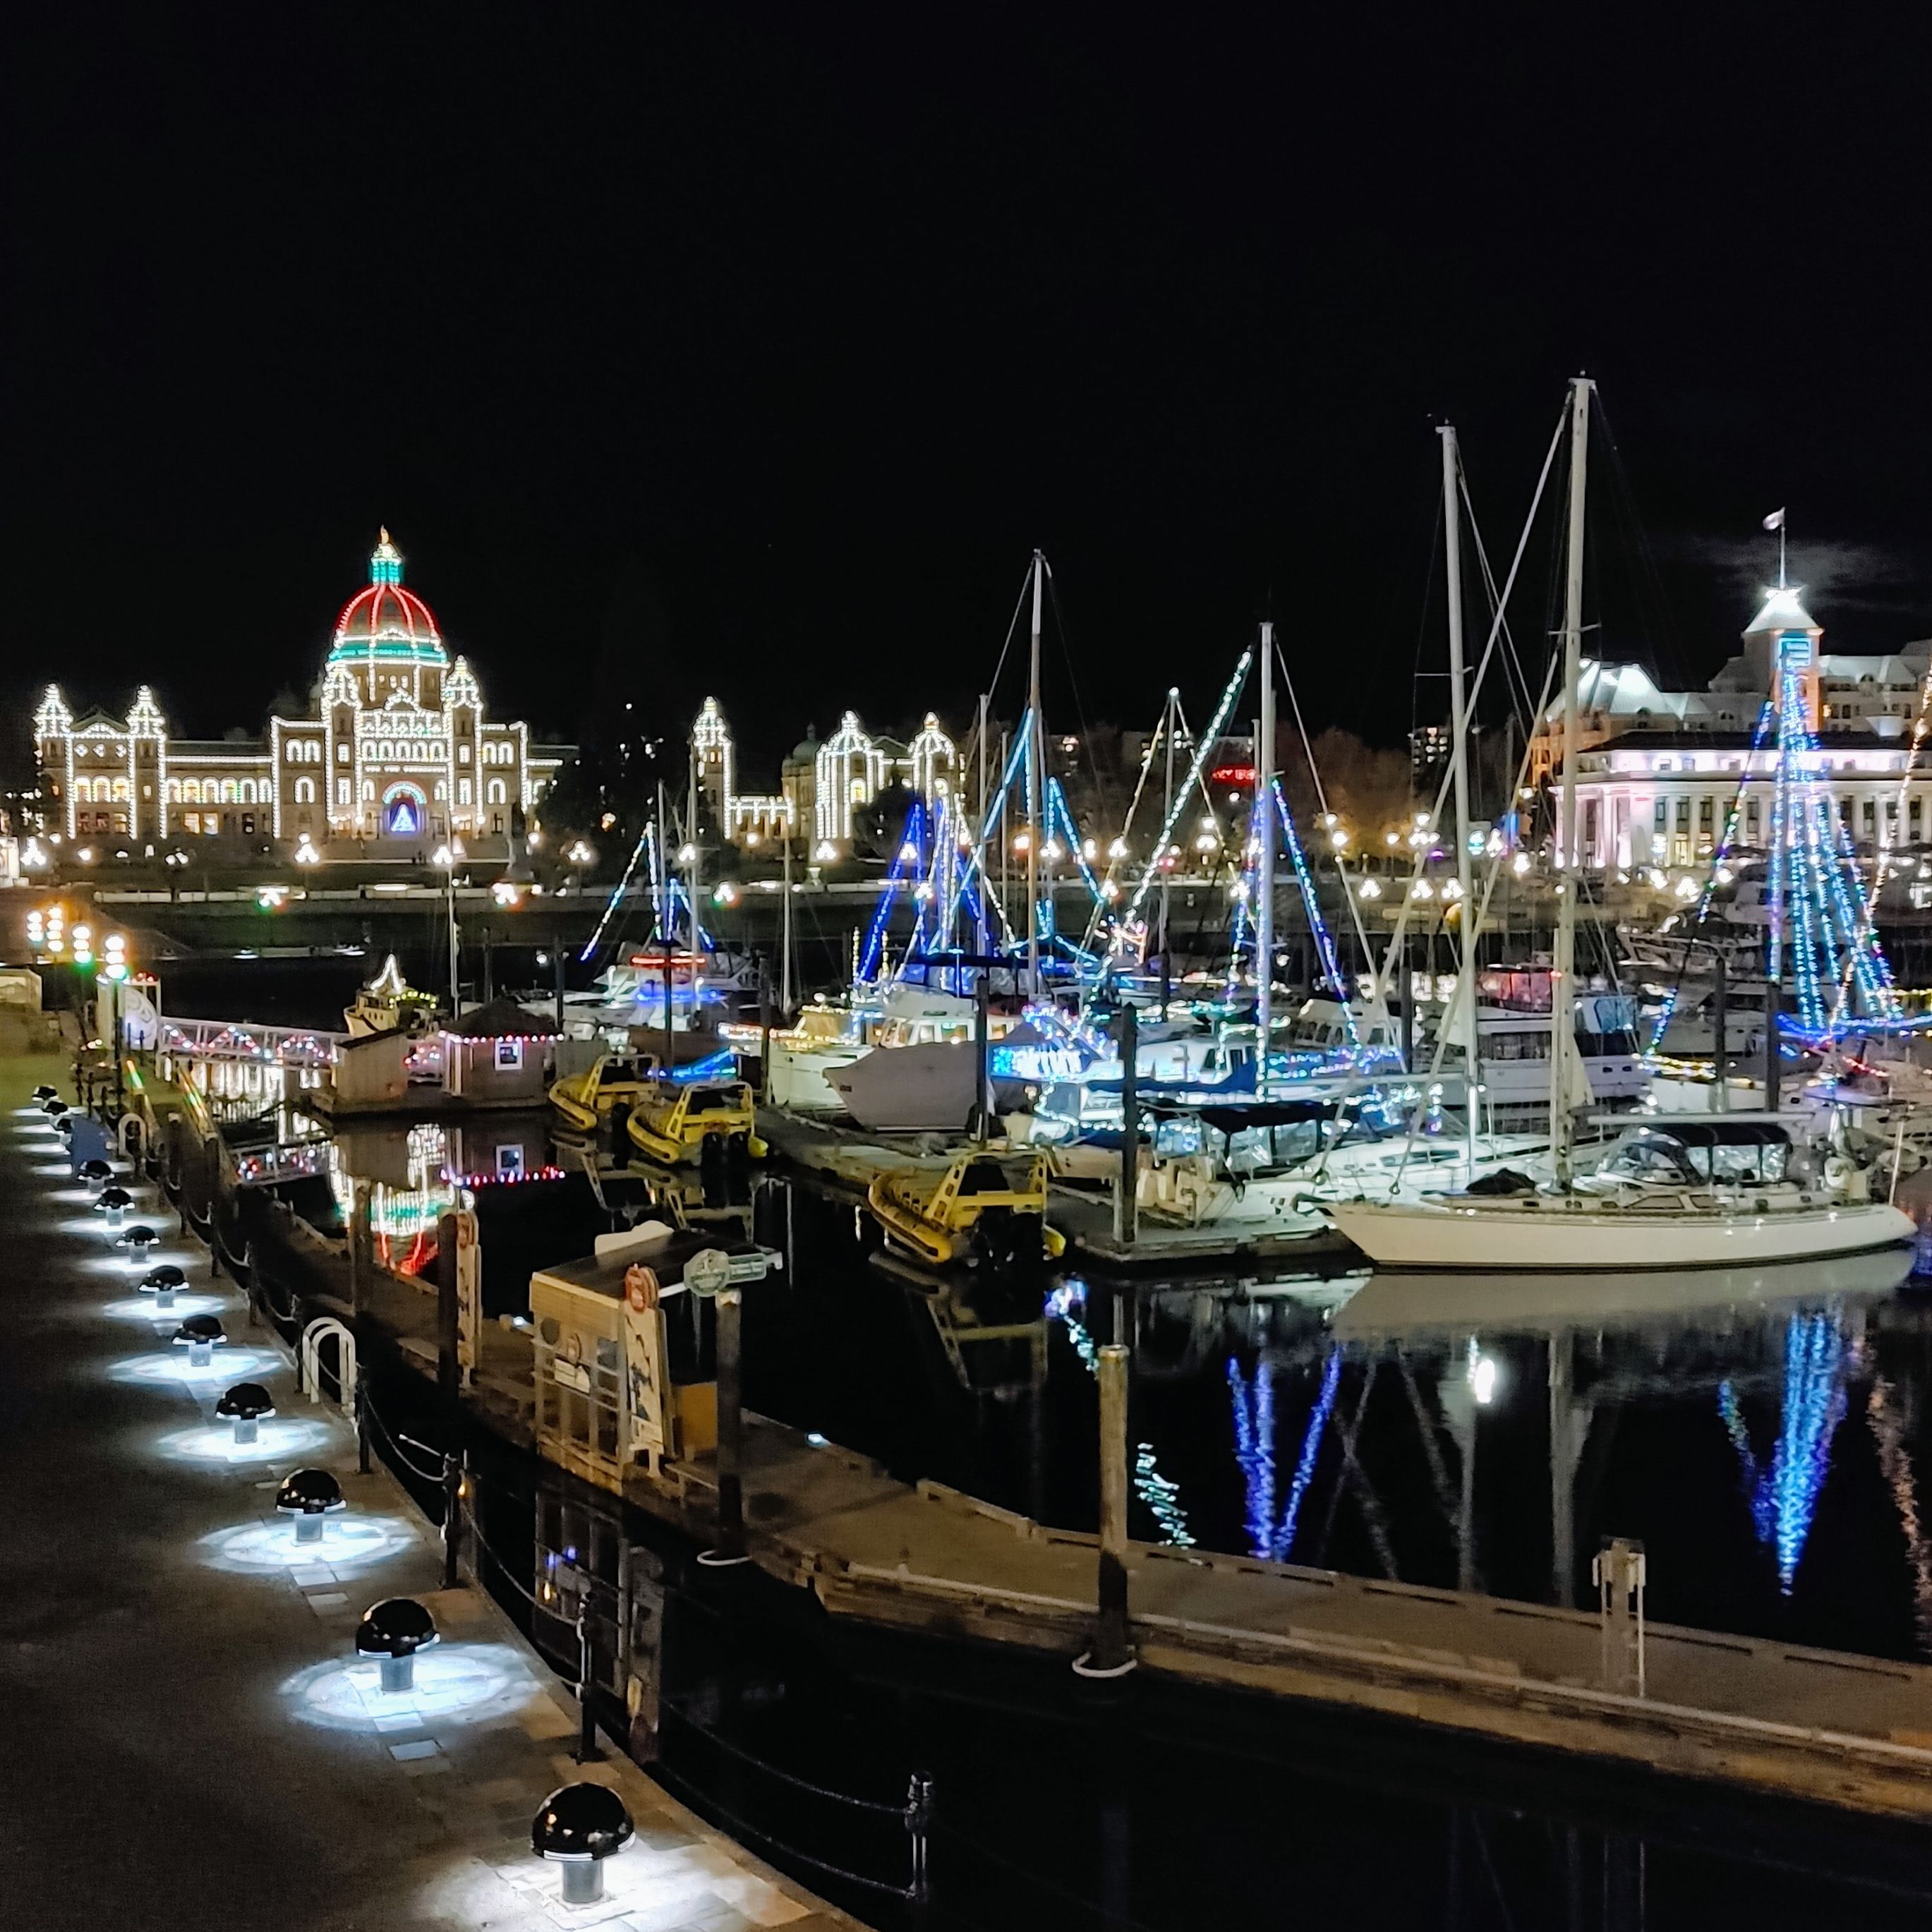 Victoria, BC harbour at night with Christmas light decorations